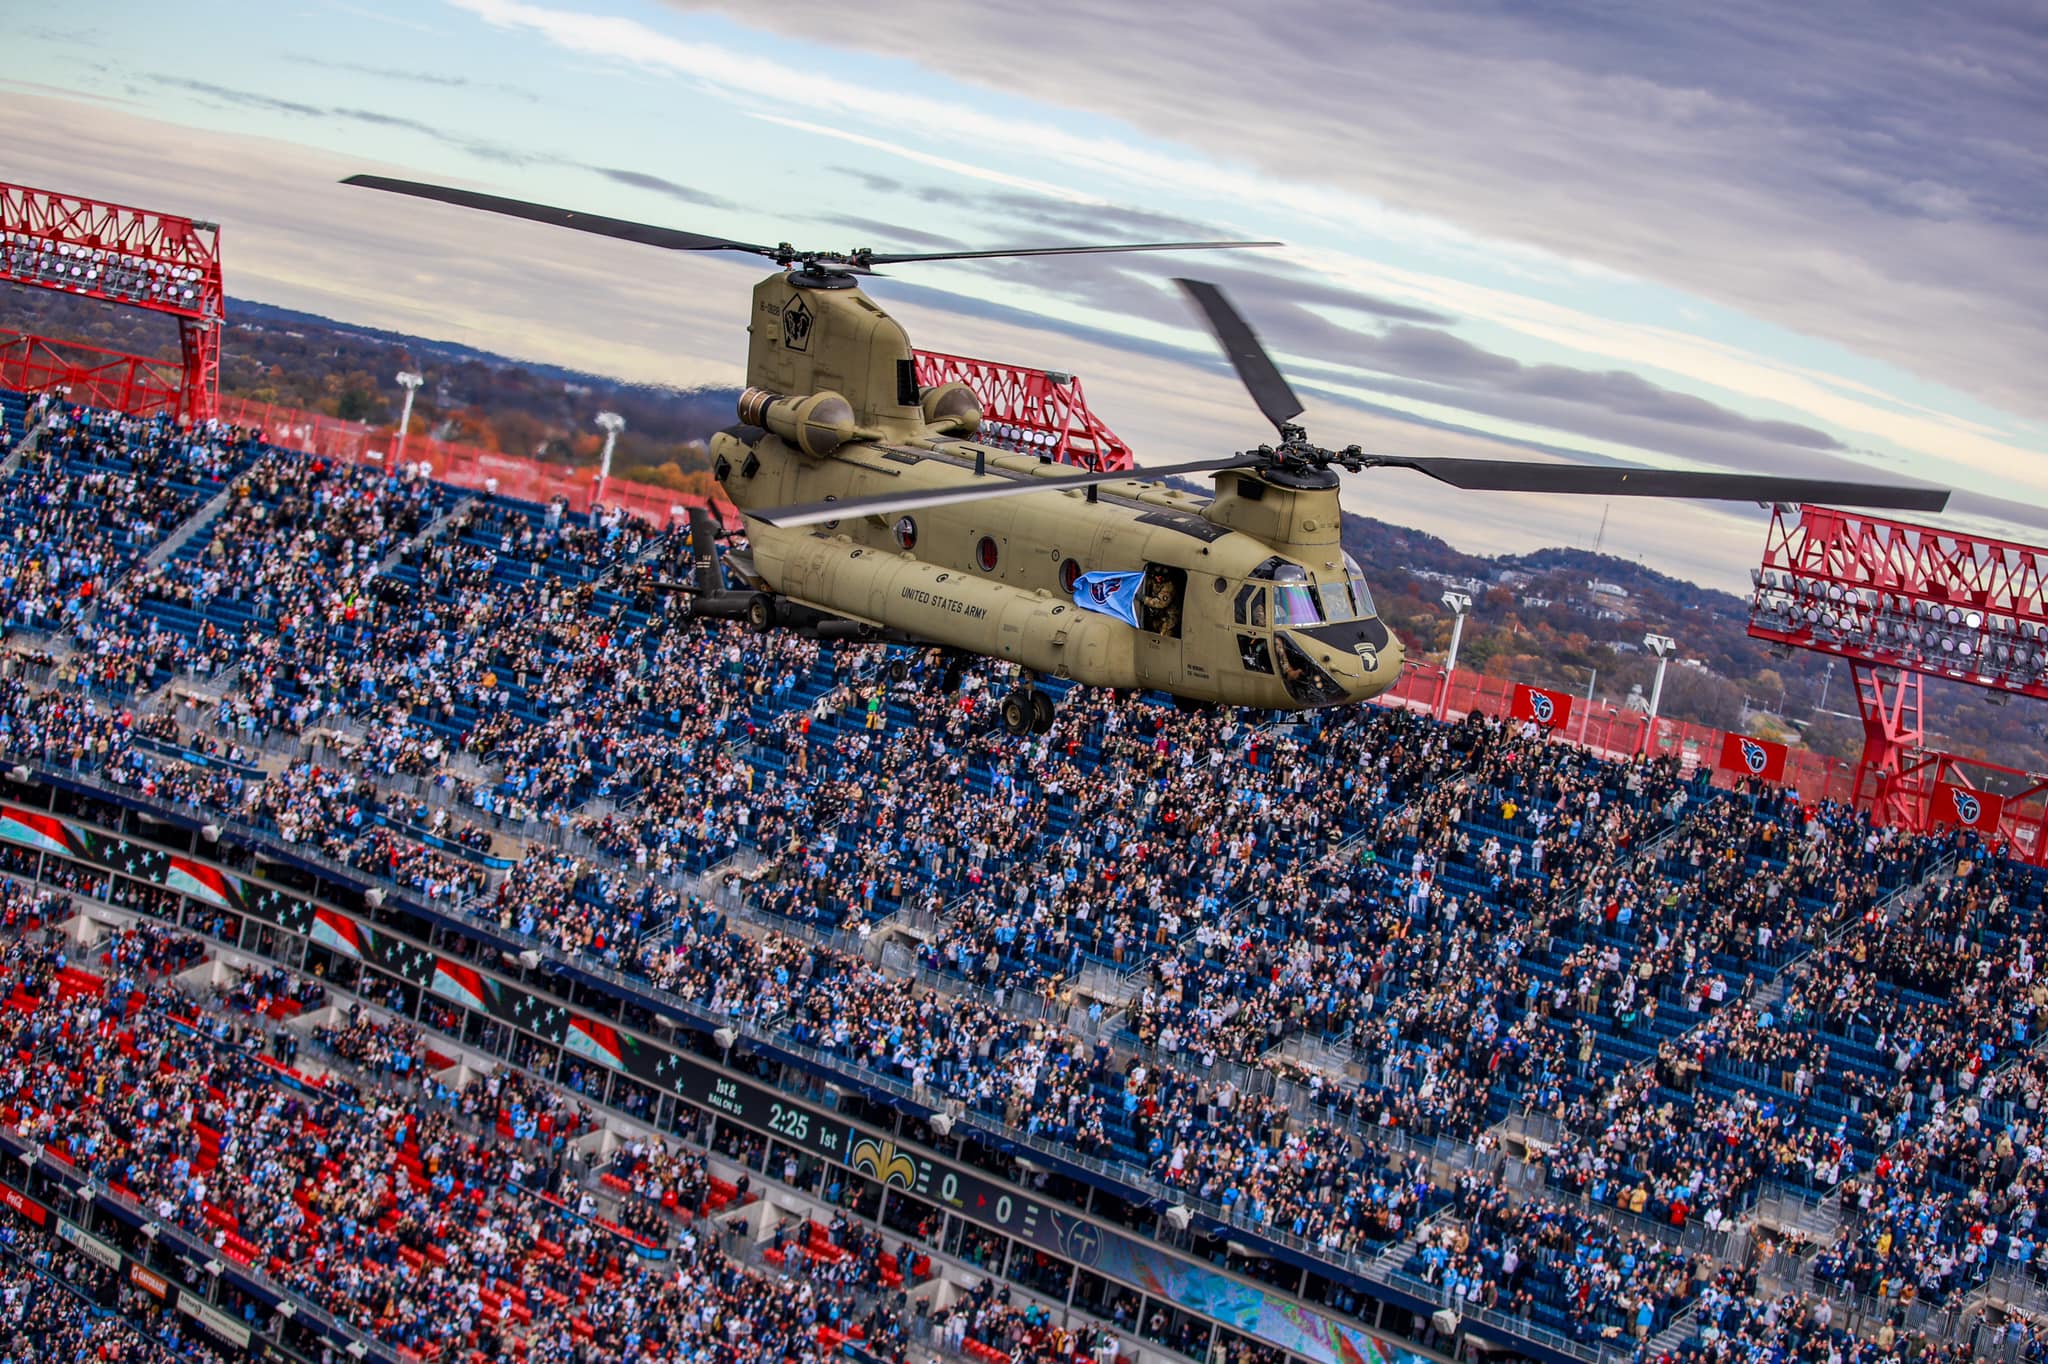 Army launches inquiry into startling NFL game flyover by Fort